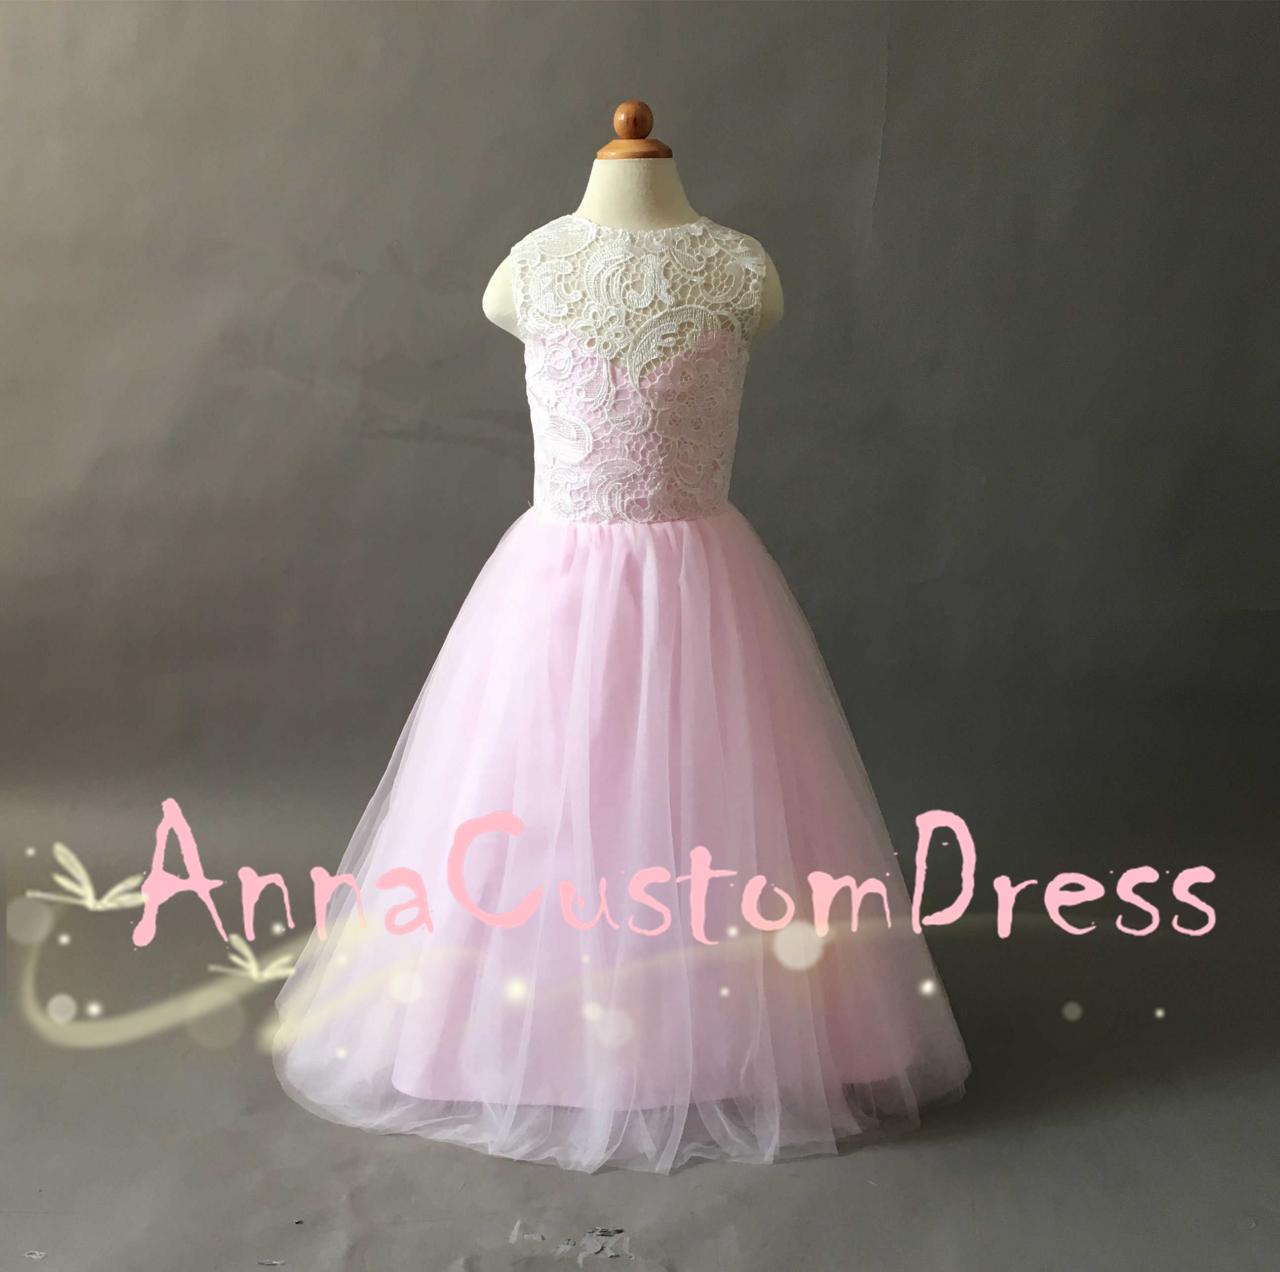 Scoop Floor-length Ivory Lace Pale Pink Tulle Flower Girl Dress